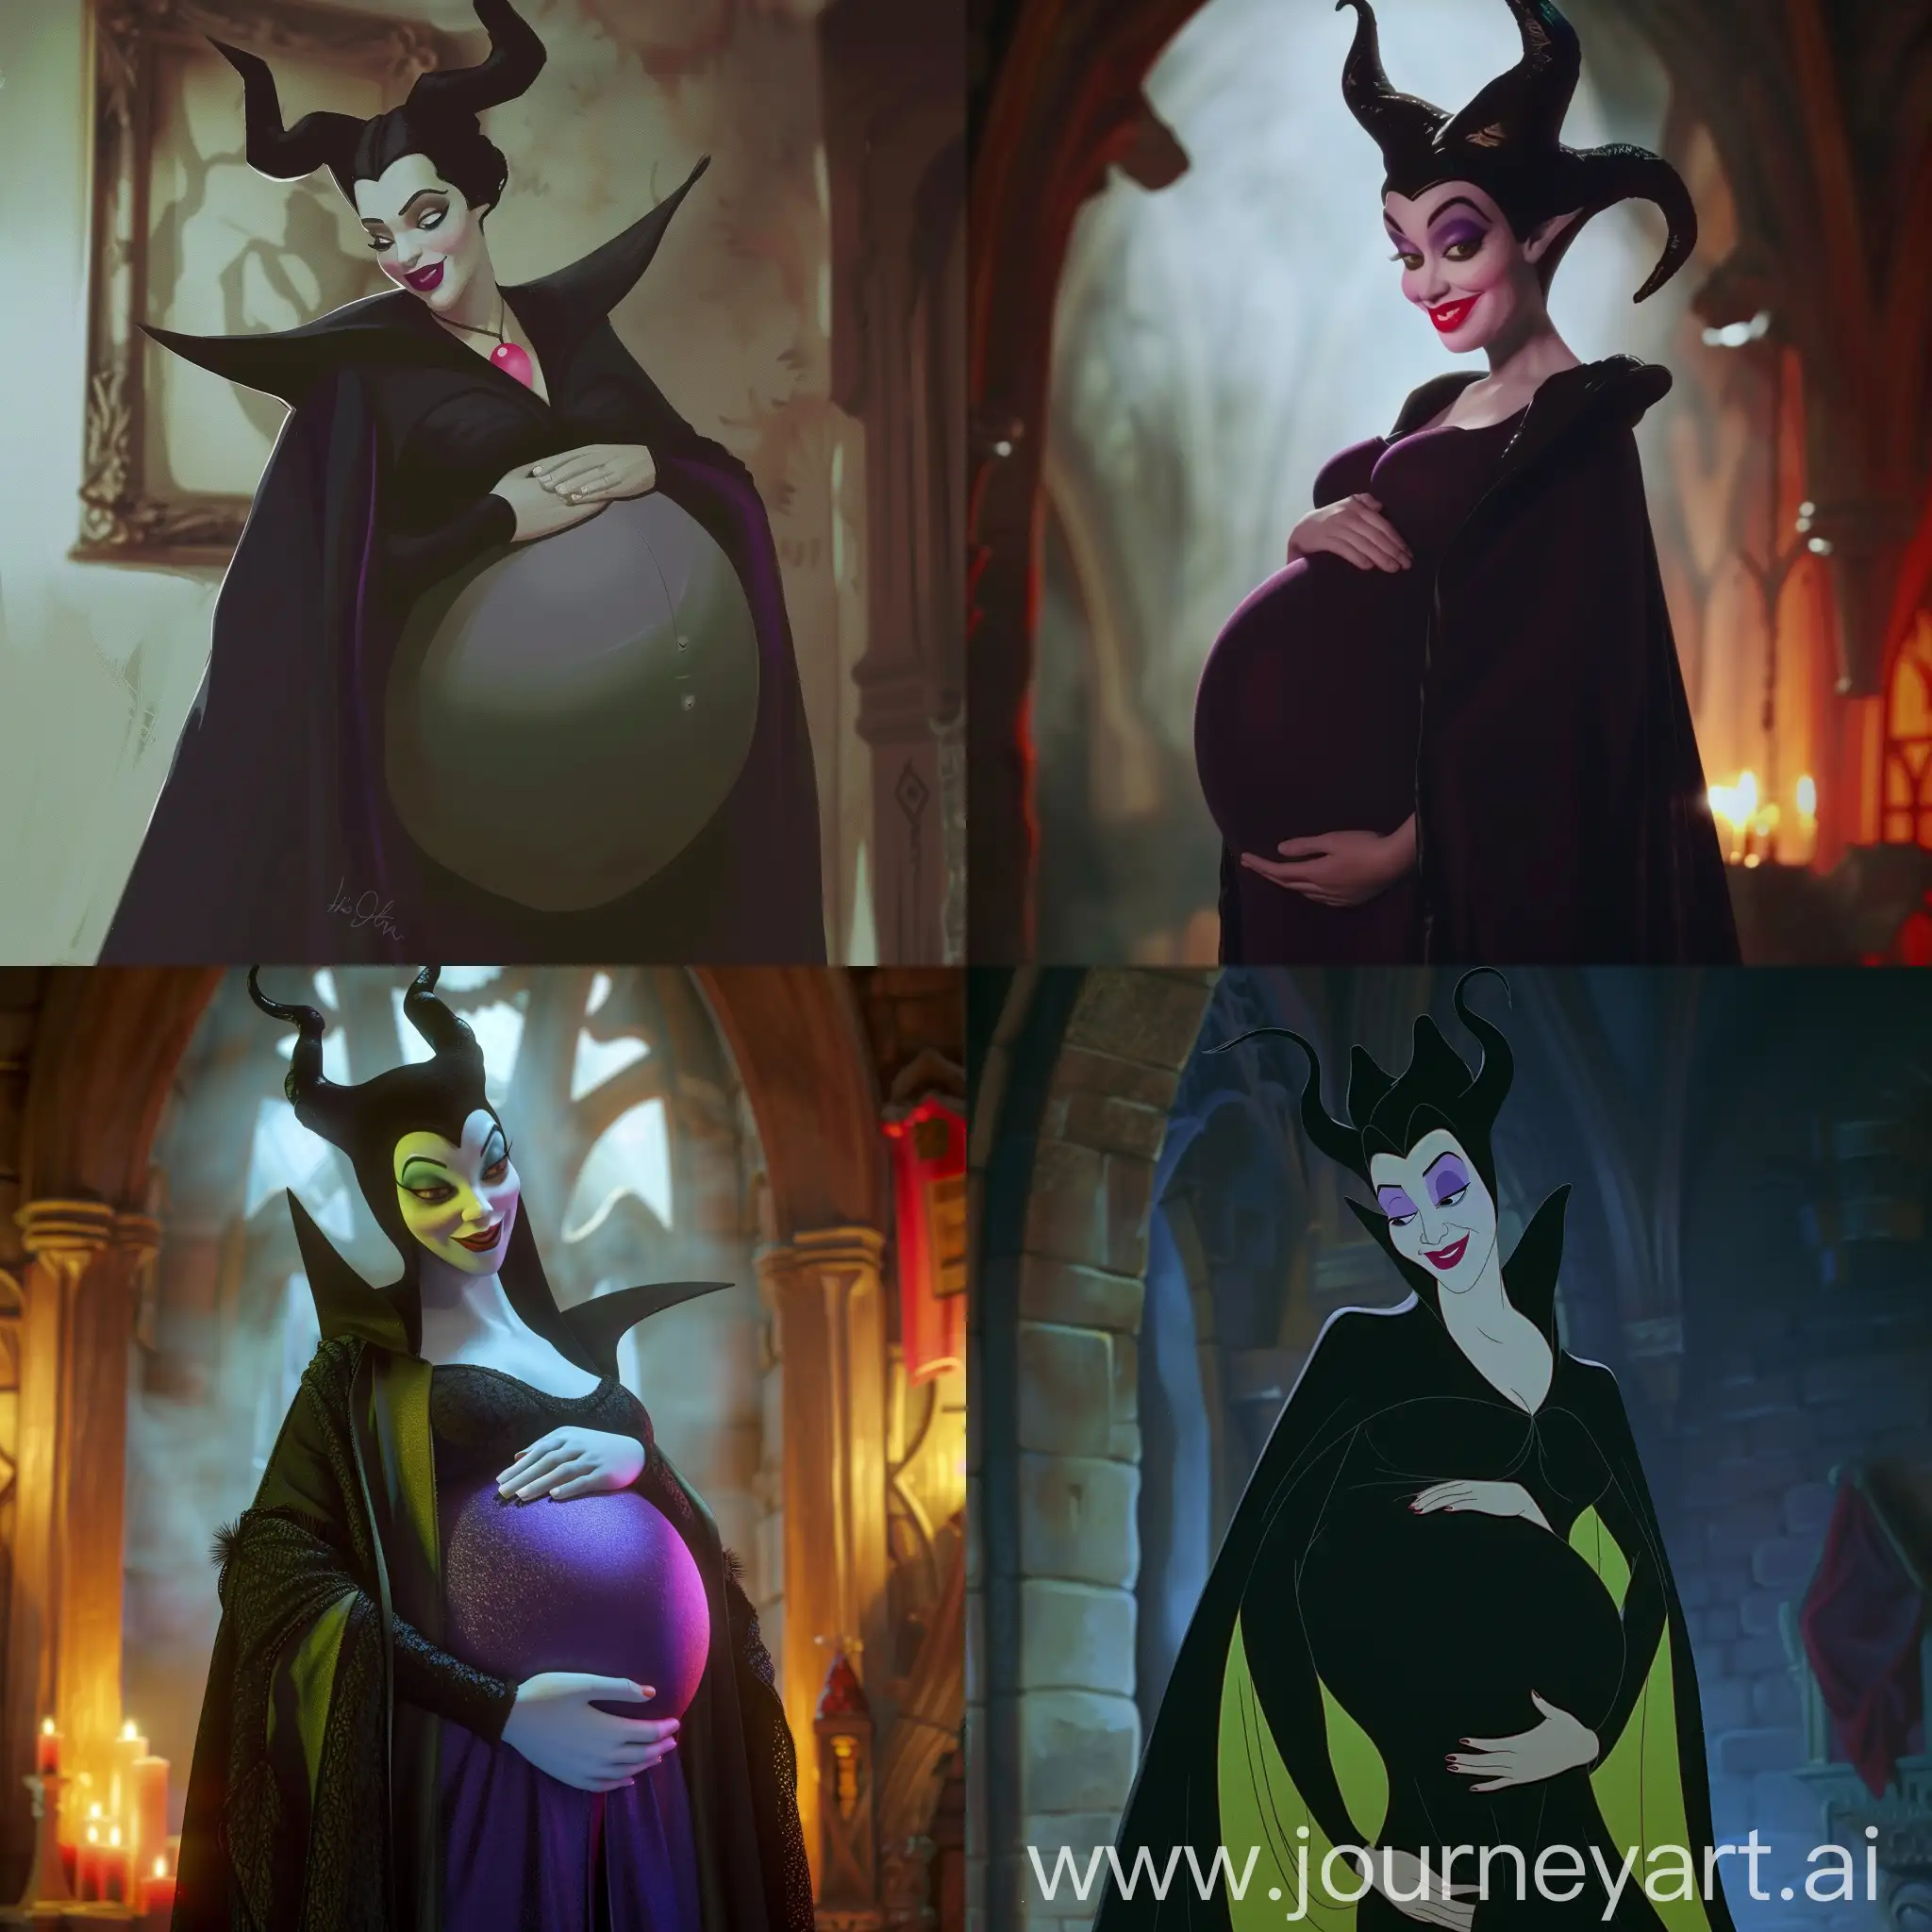 Maleficent, Very Pregnant, Her pregnant belly is quite large.